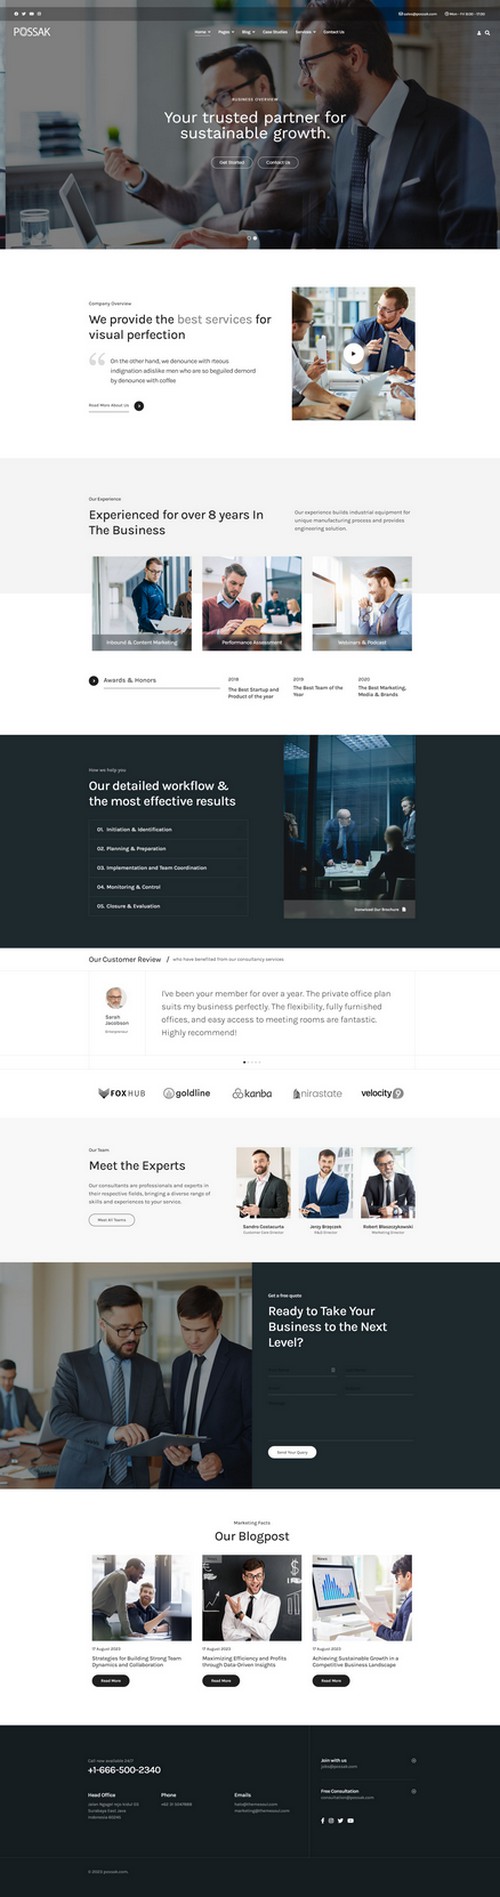 Possak - Business and Consulting Joomla Template